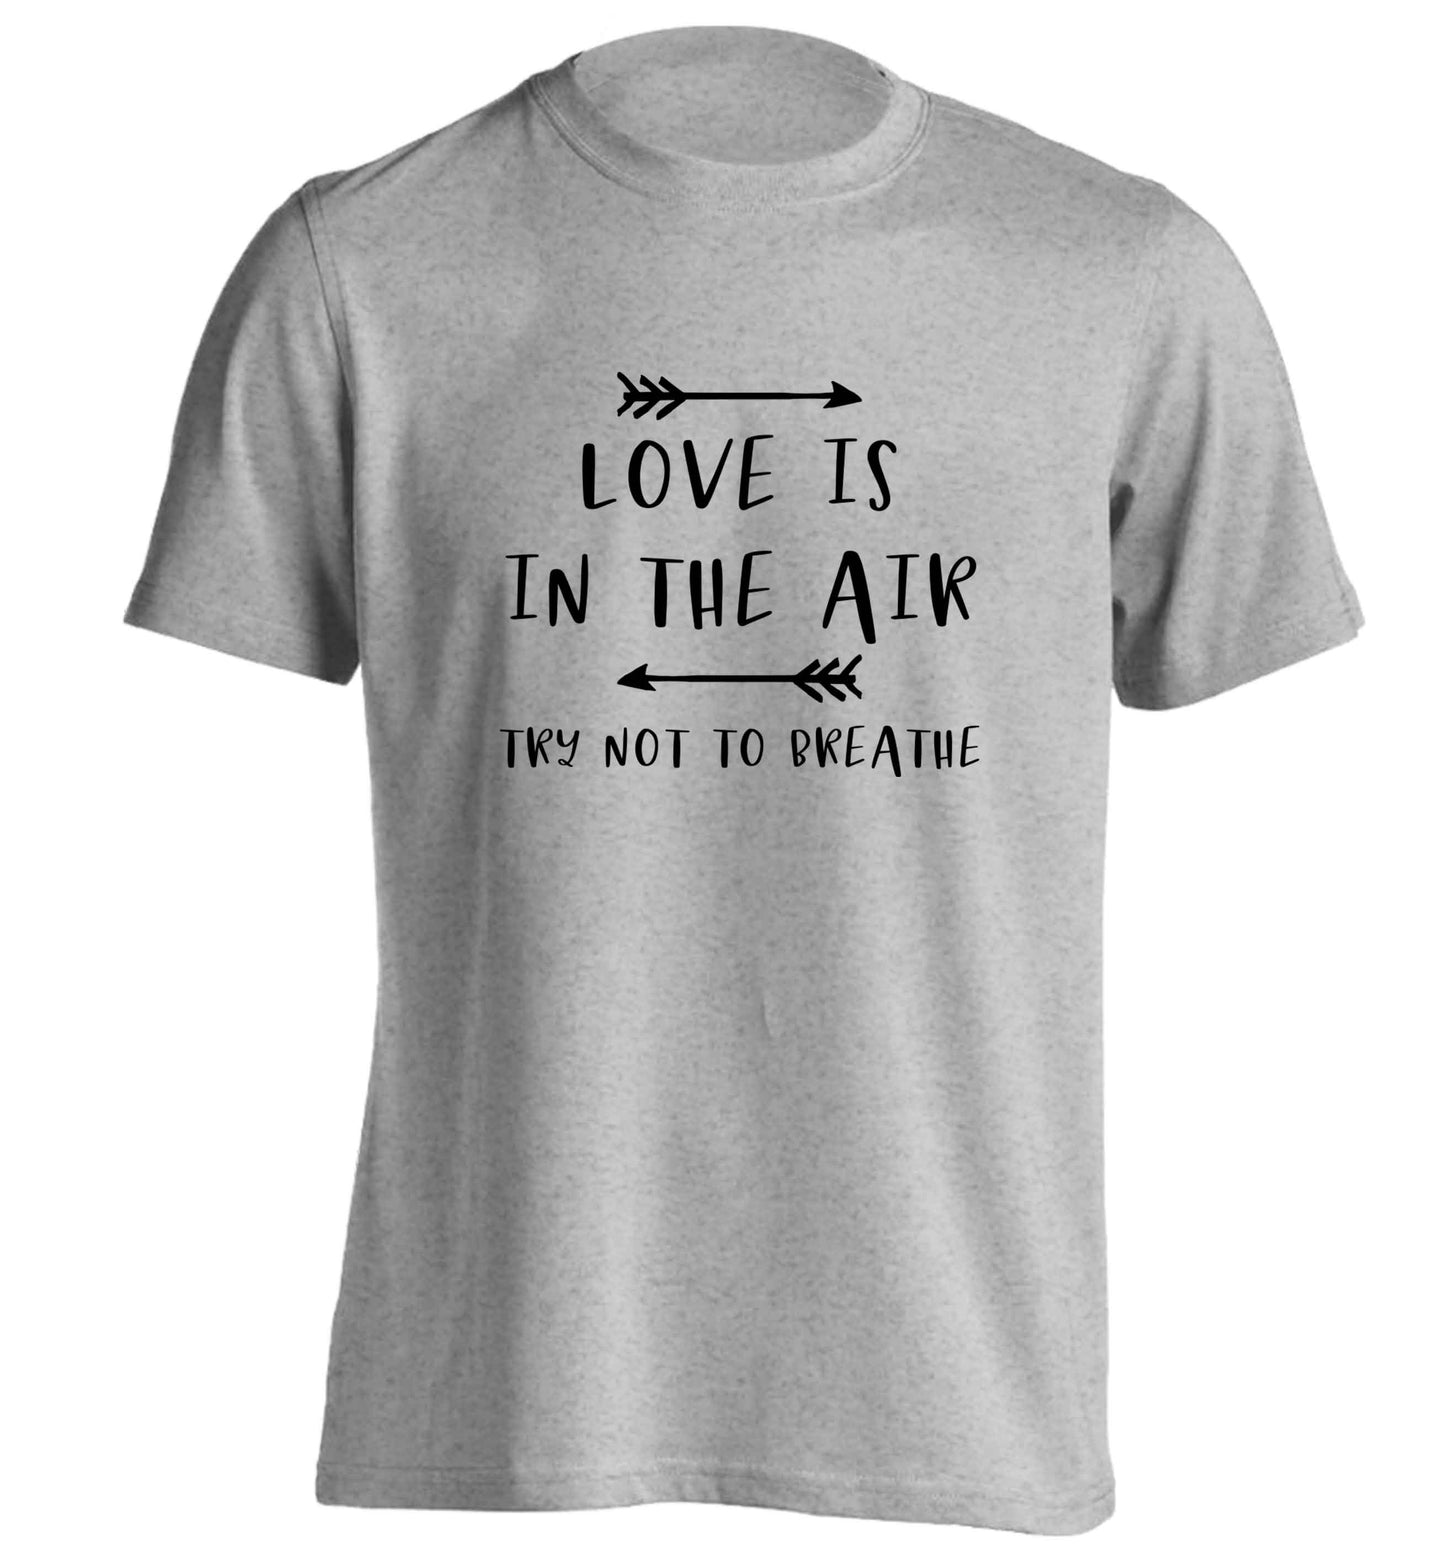 Love is in the air try not to breathe adults unisex grey Tshirt 2XL